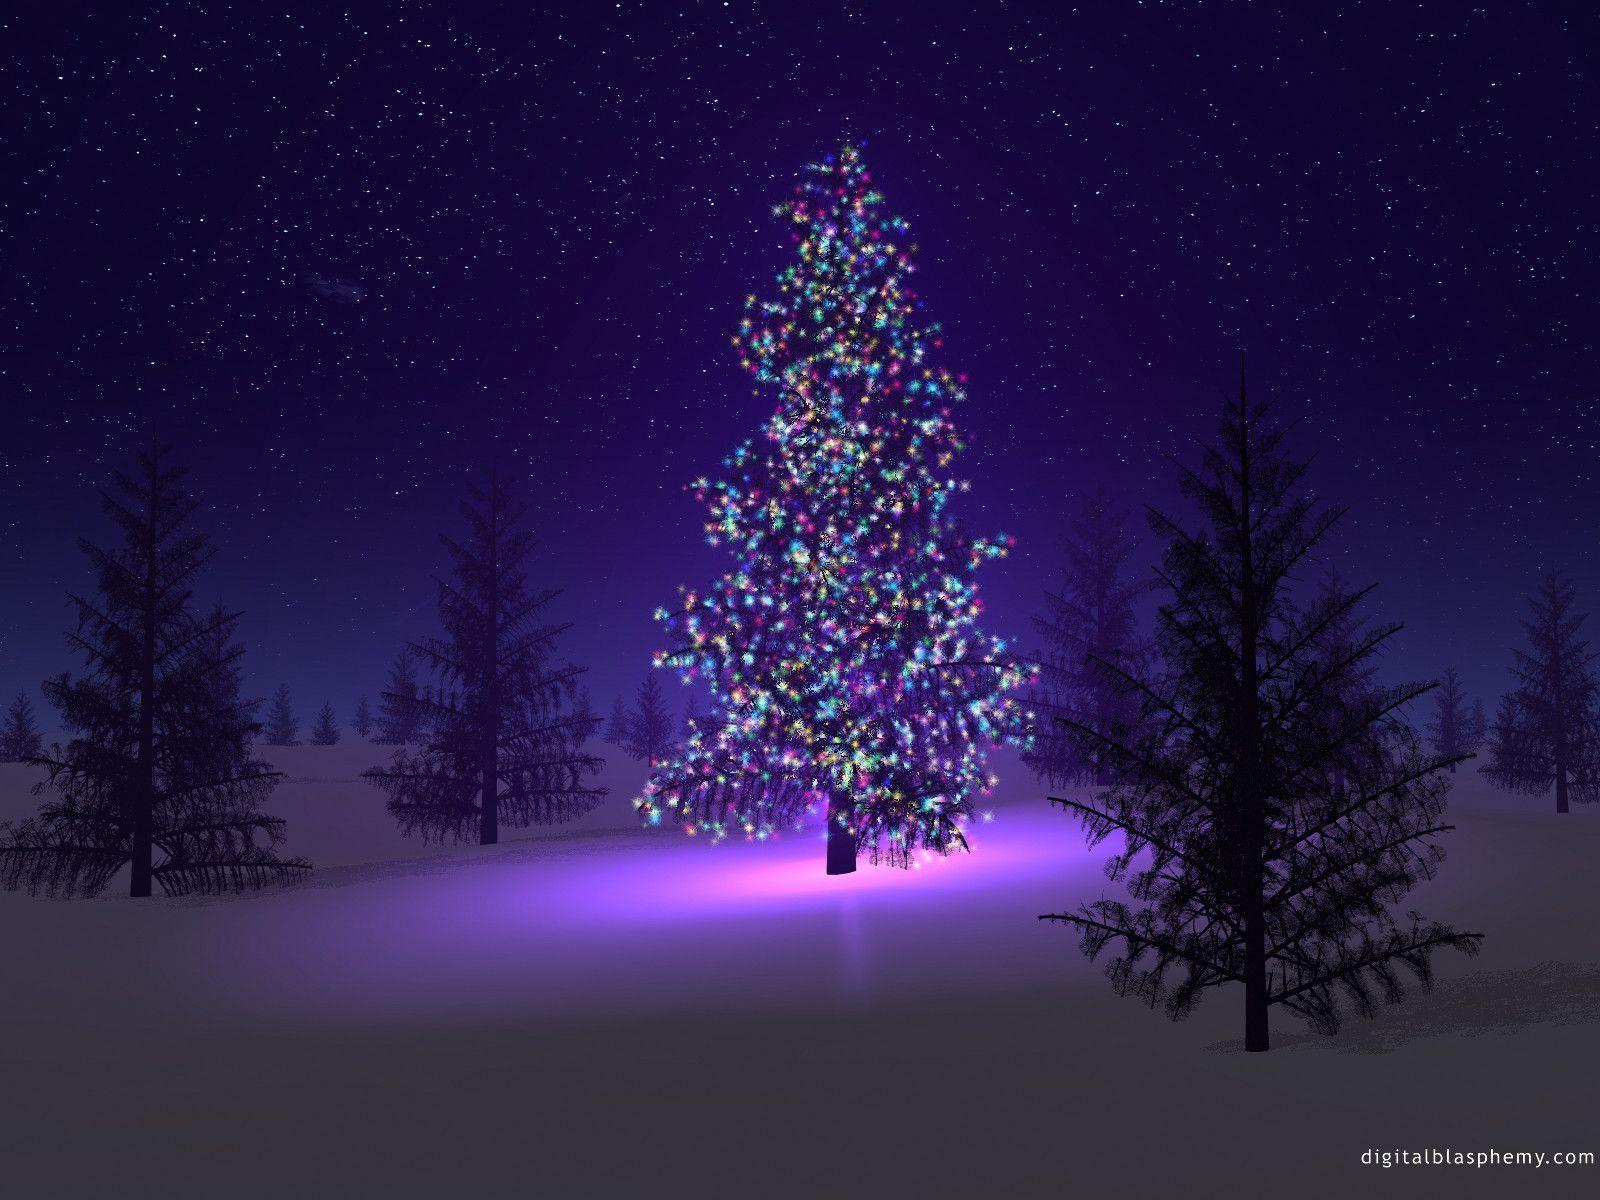 HD happy holidays wallpaper download free, New year